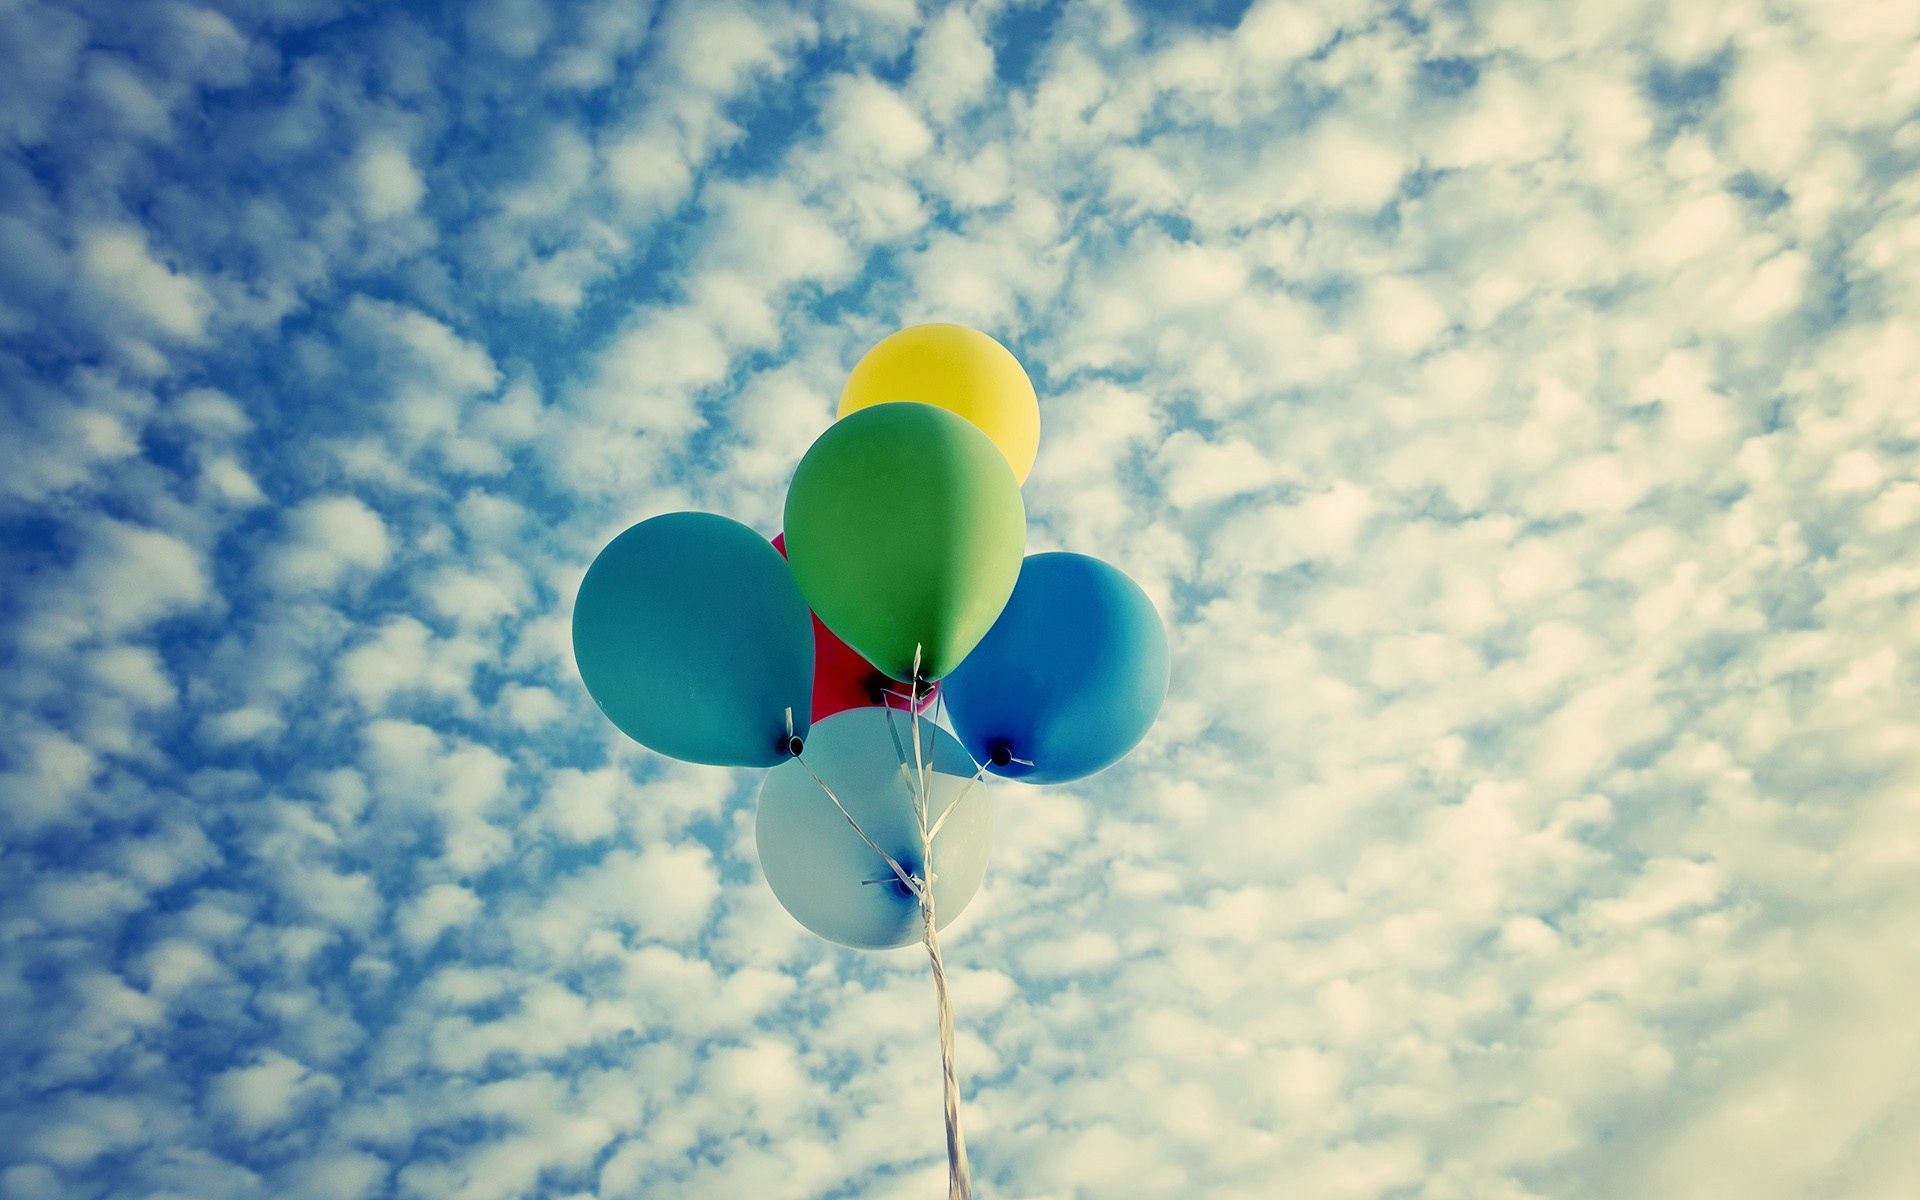 android balloons, sky, clouds, miscellanea, miscellaneous, multicolored, motley, flight